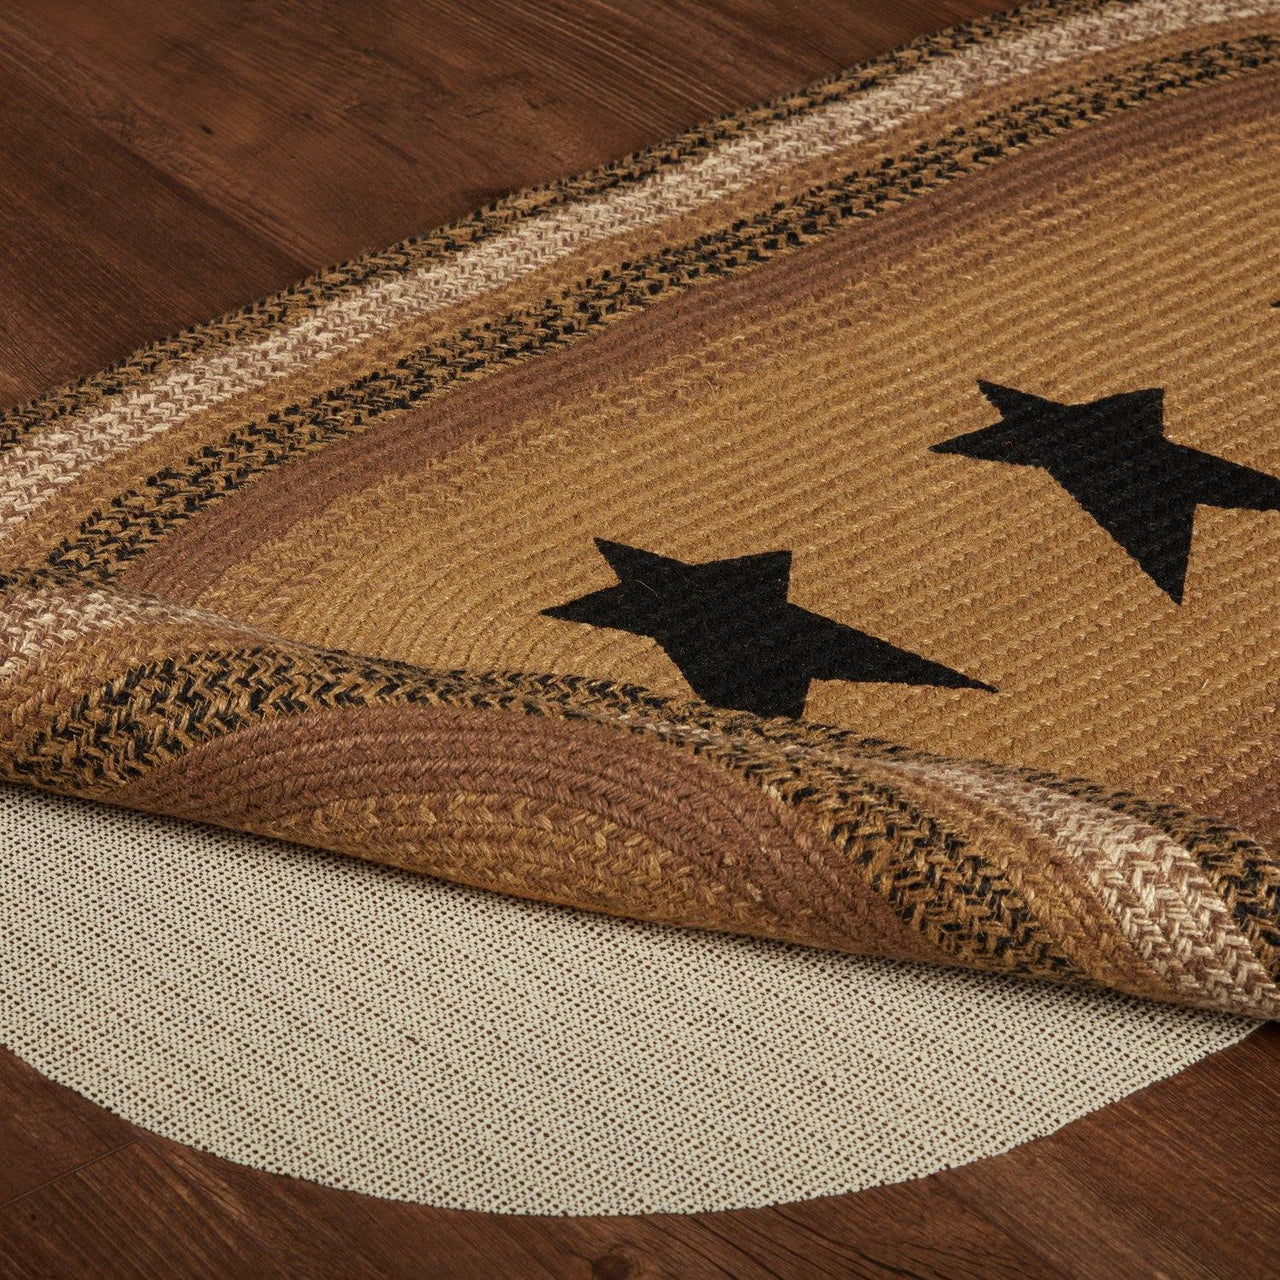 Kettle Grove Jute Braided Rug Oval Stencil Stars 27"x48" with Rug Pad VHC Brands - The Fox Decor